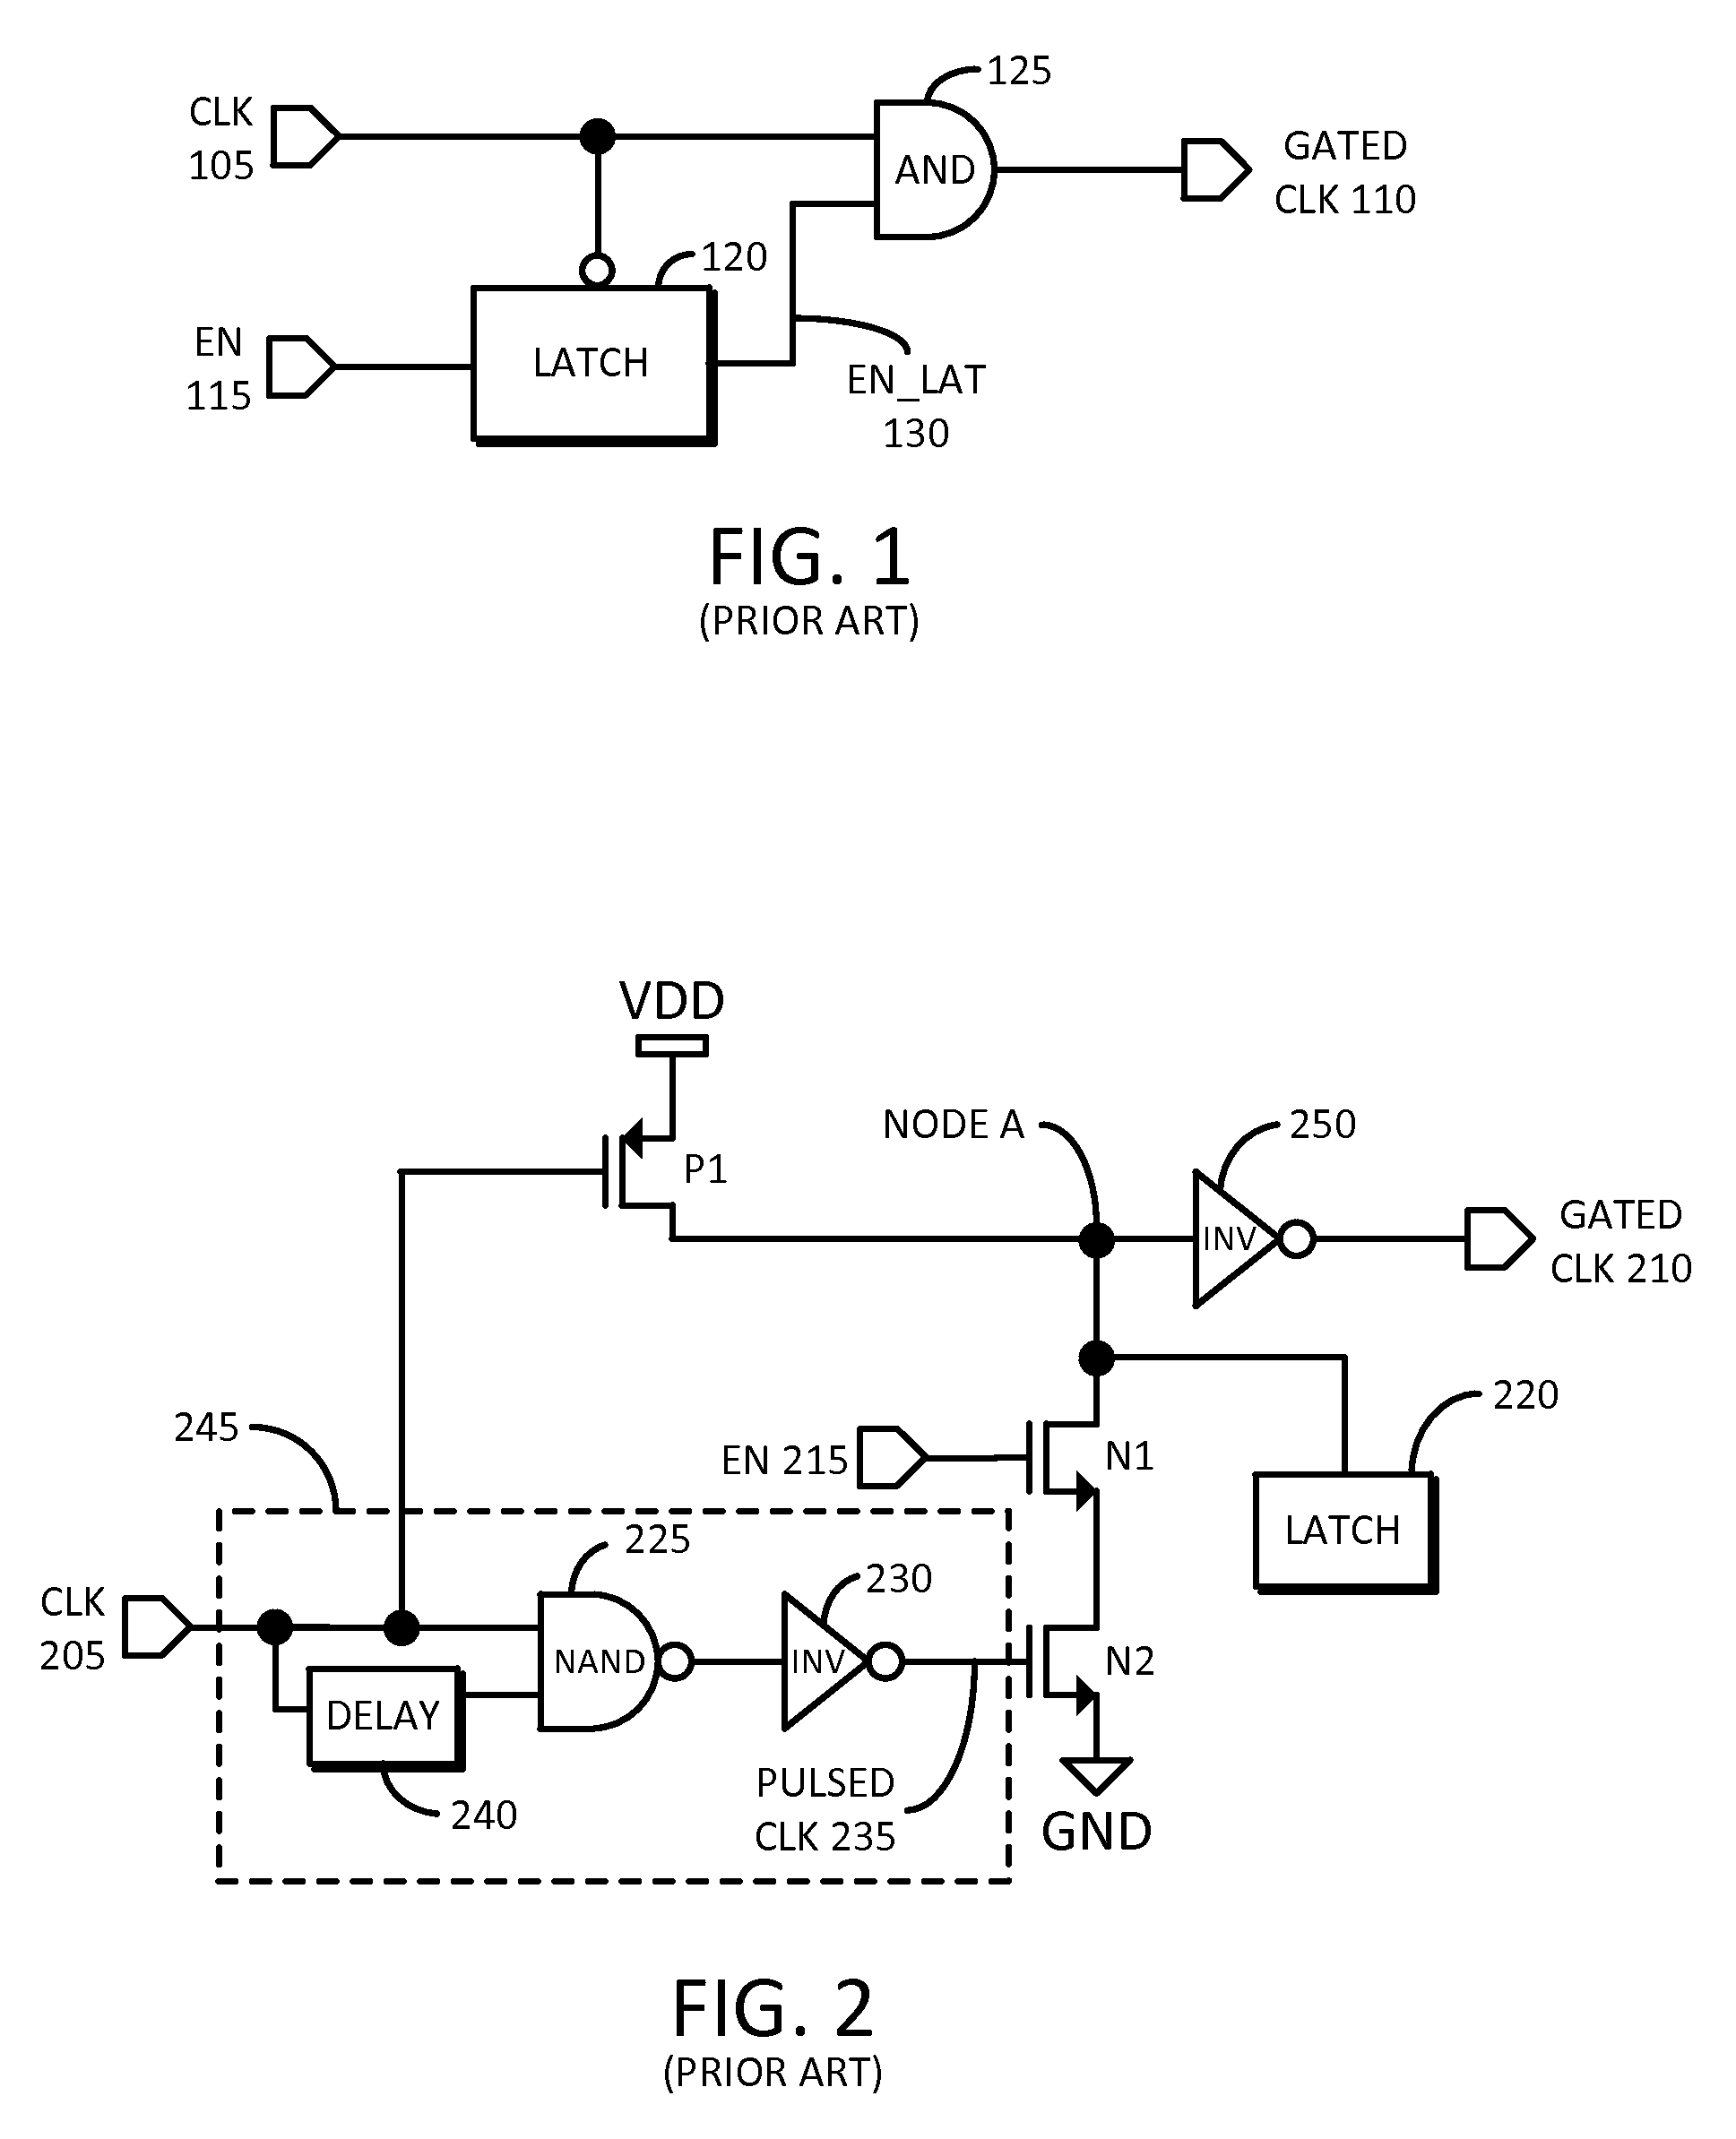 Integrated clock gater (ICG) using clock cascode complimentary switch logic